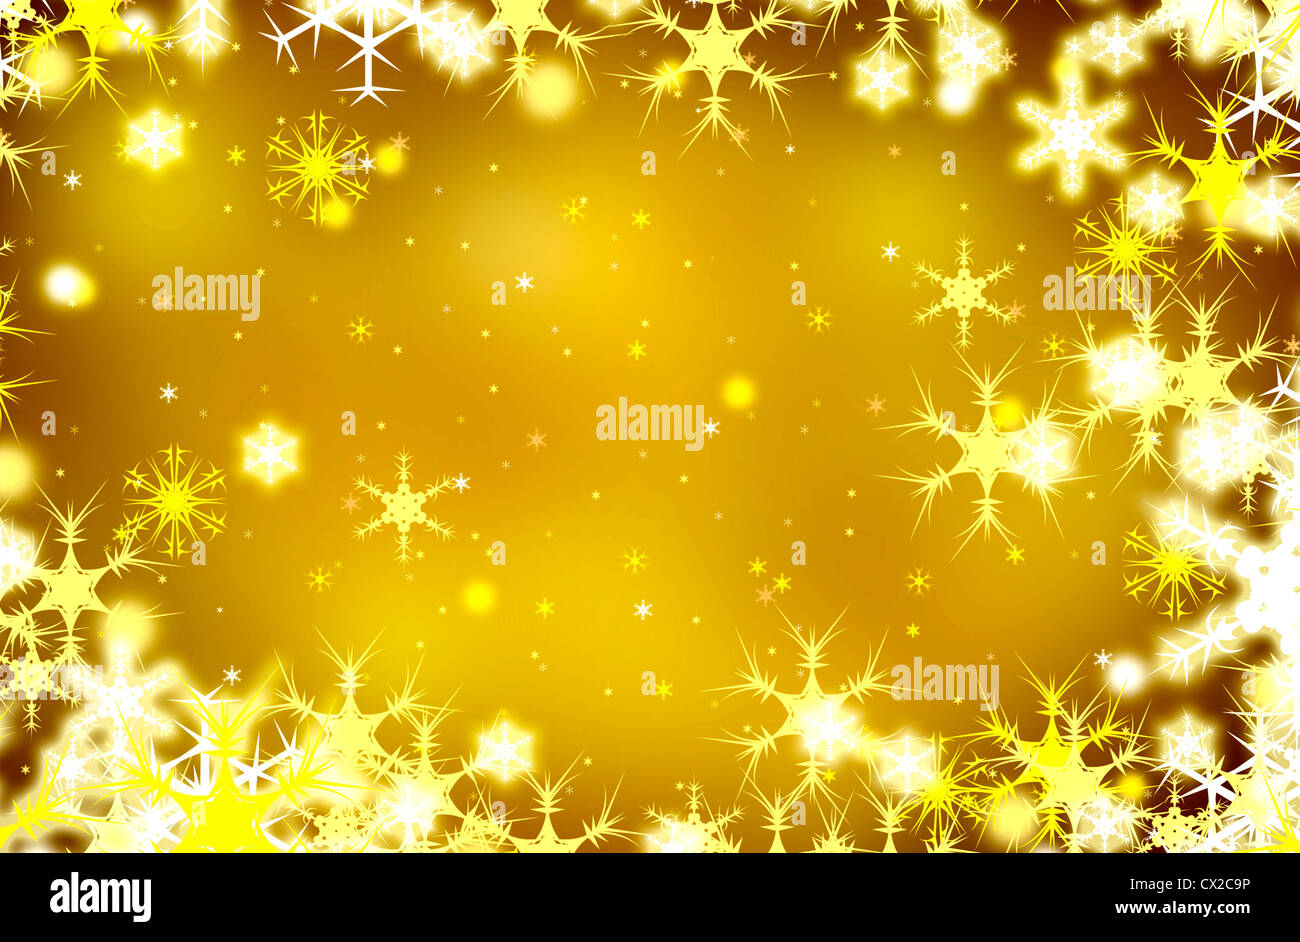 Yellow Christmas background textured with flakes of snow Stock Photo